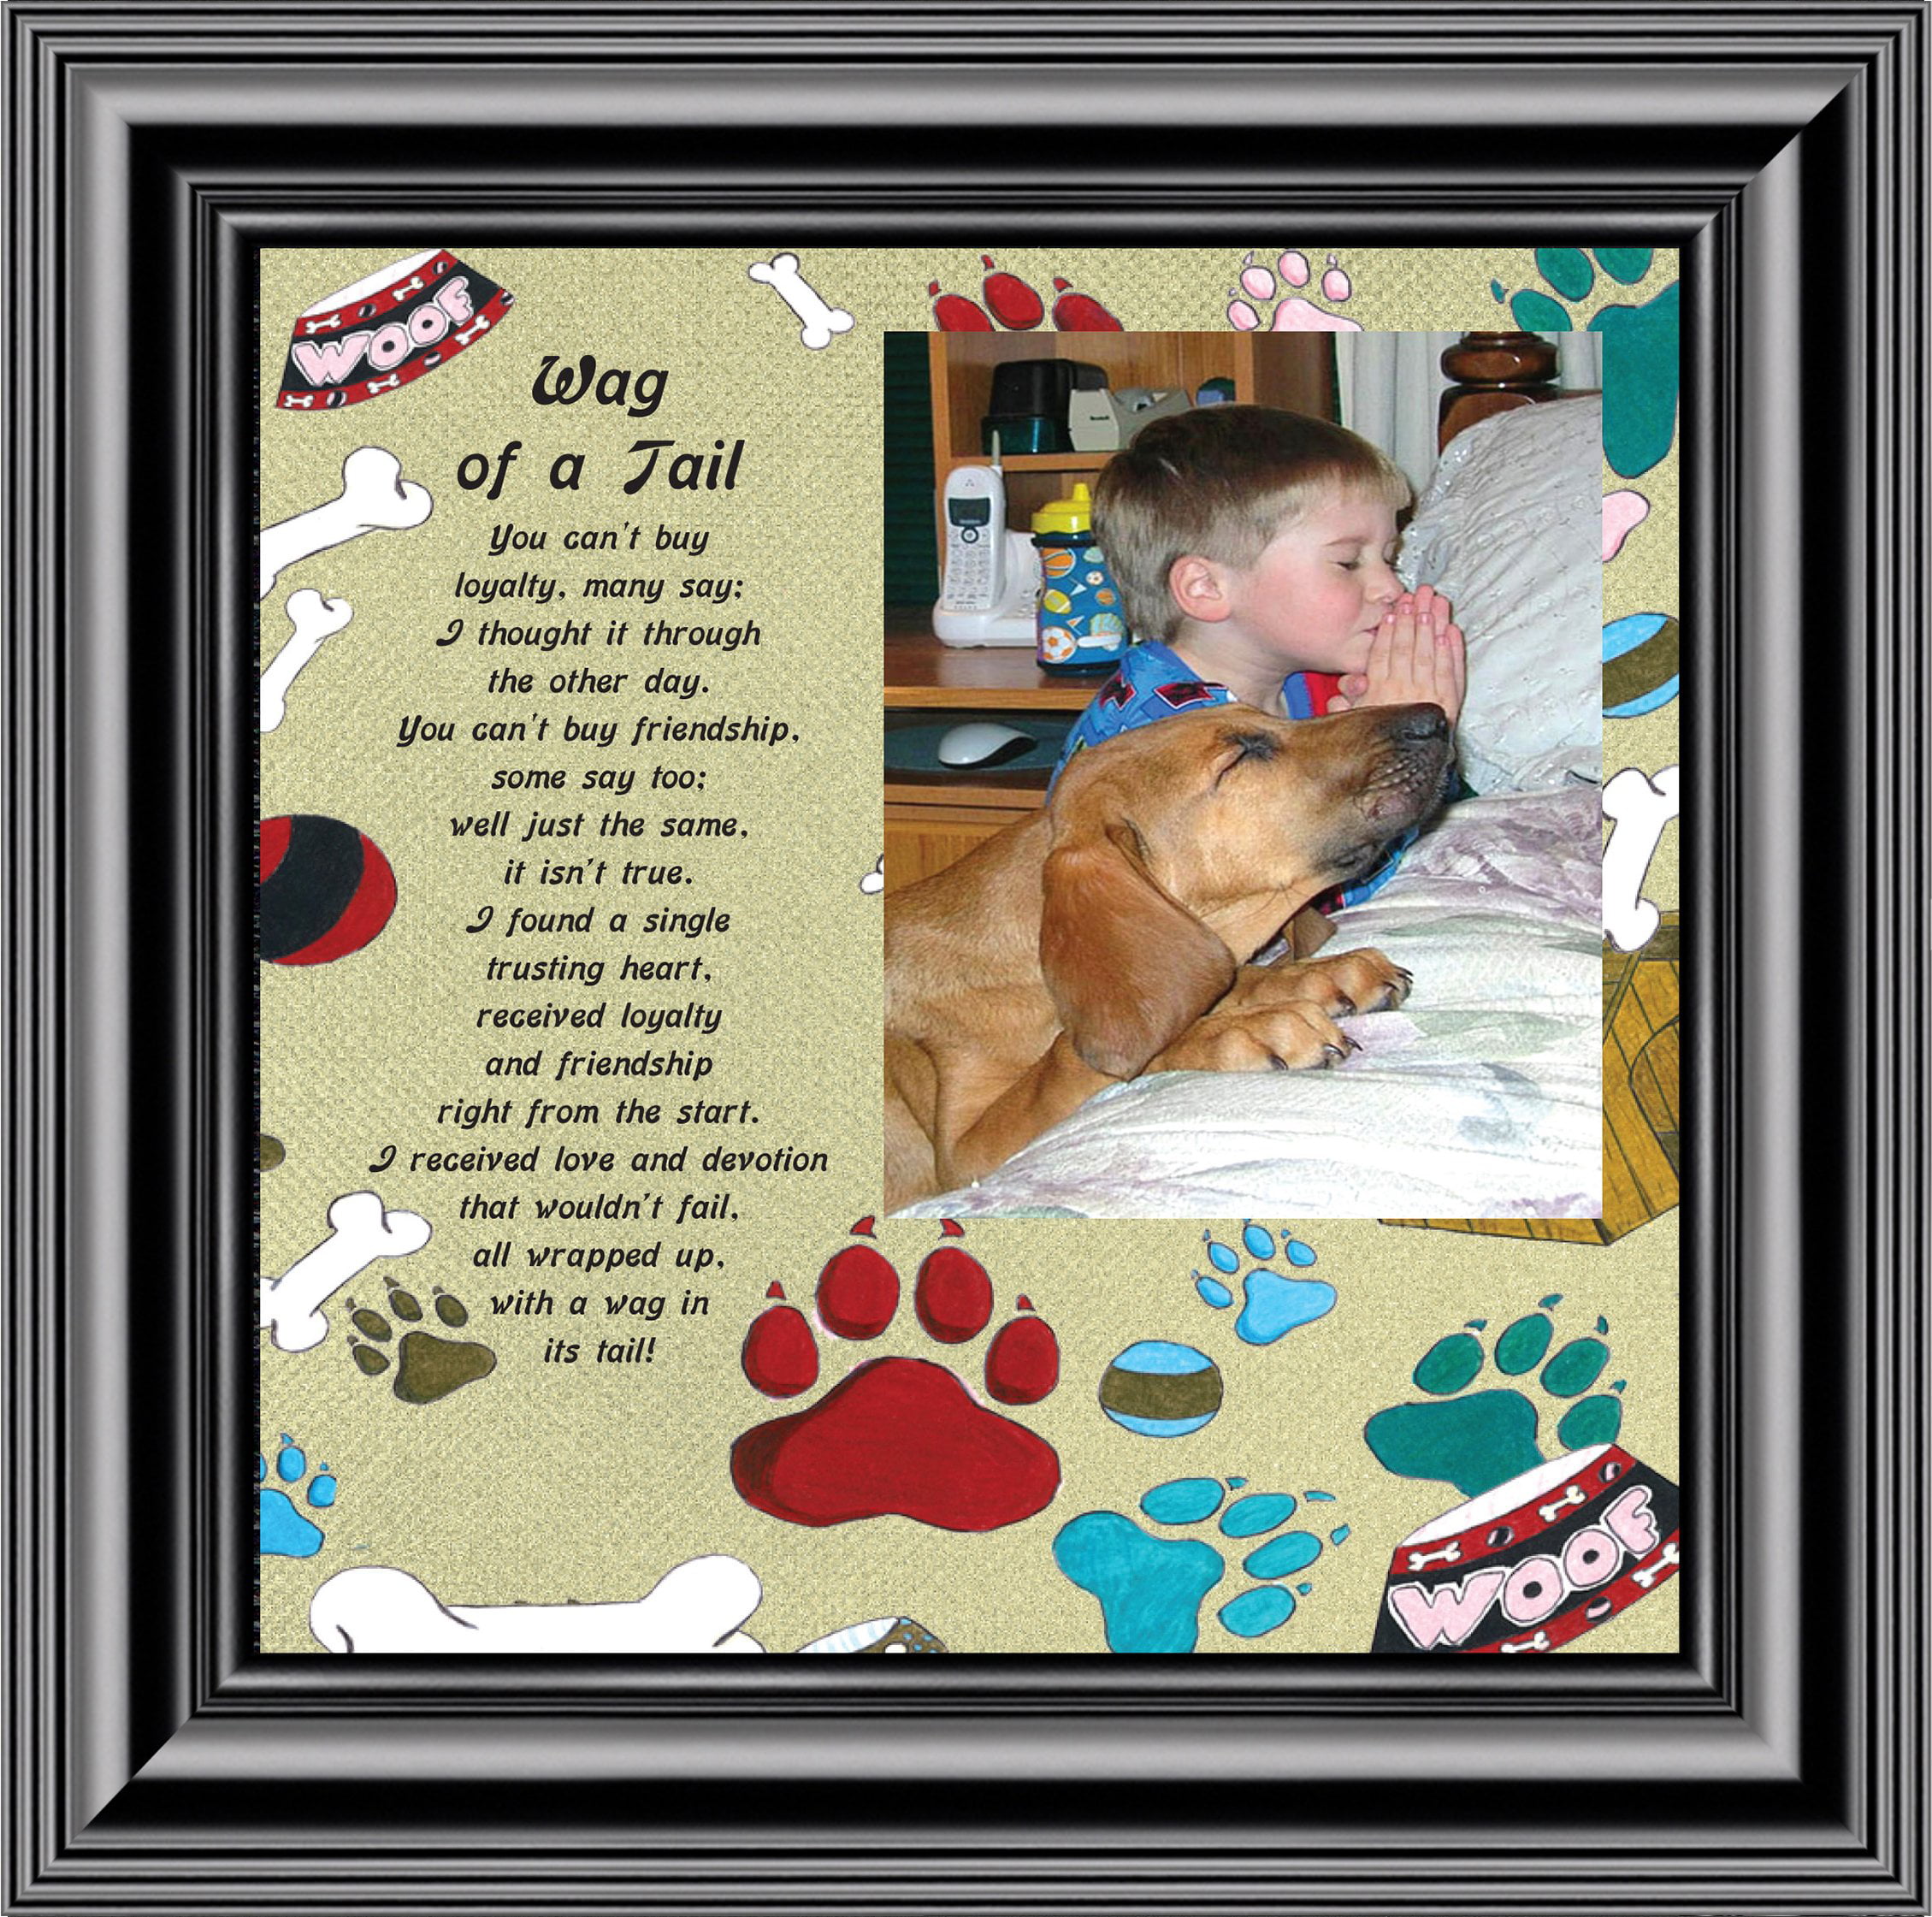 Wag of a Tail, Appreciation of Your Dog Framed Poem, New Puppy Owner, 10X10  6764 